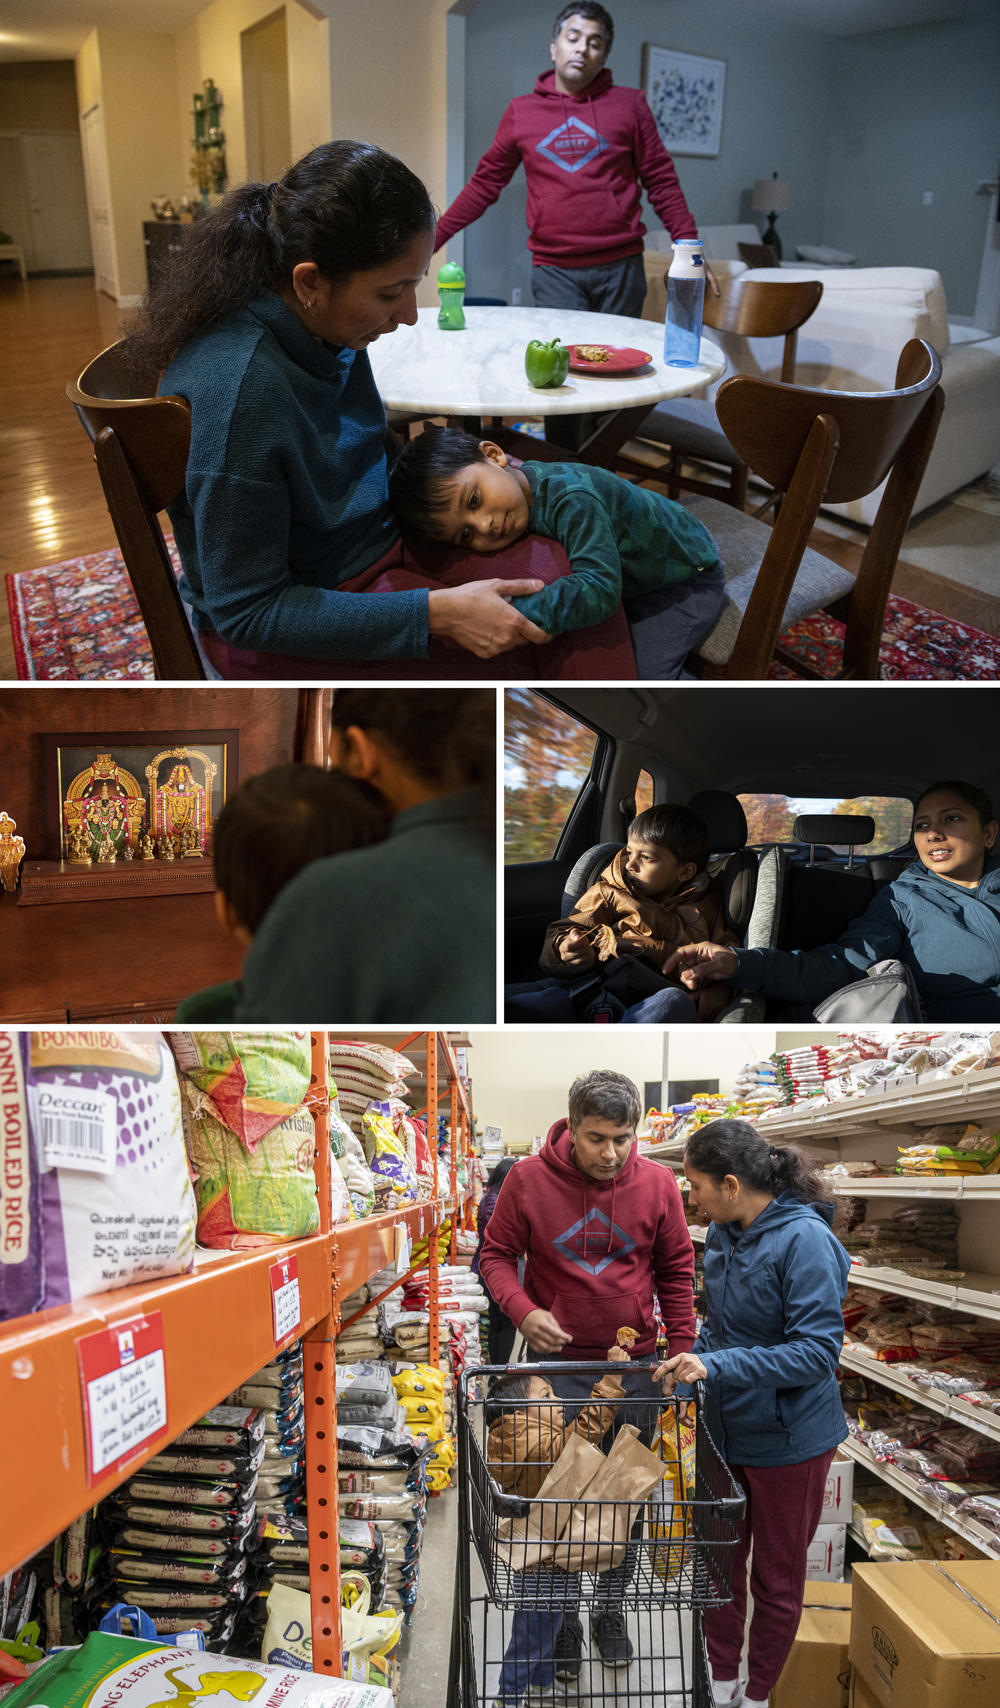 Top: Ridhay rests on his mother's lap at their dinner table in Novi, Mich., on Oct. 15, 2022. Middle, left: Ridhay and his mother pray to the Indian deities in their prayer room in their home. Middle, right: Ridhay and his mother take in the fall colors on their way to an Indian store. Above: Ridhay and his parents shop for their monthly groceries at the nearby Indian store.